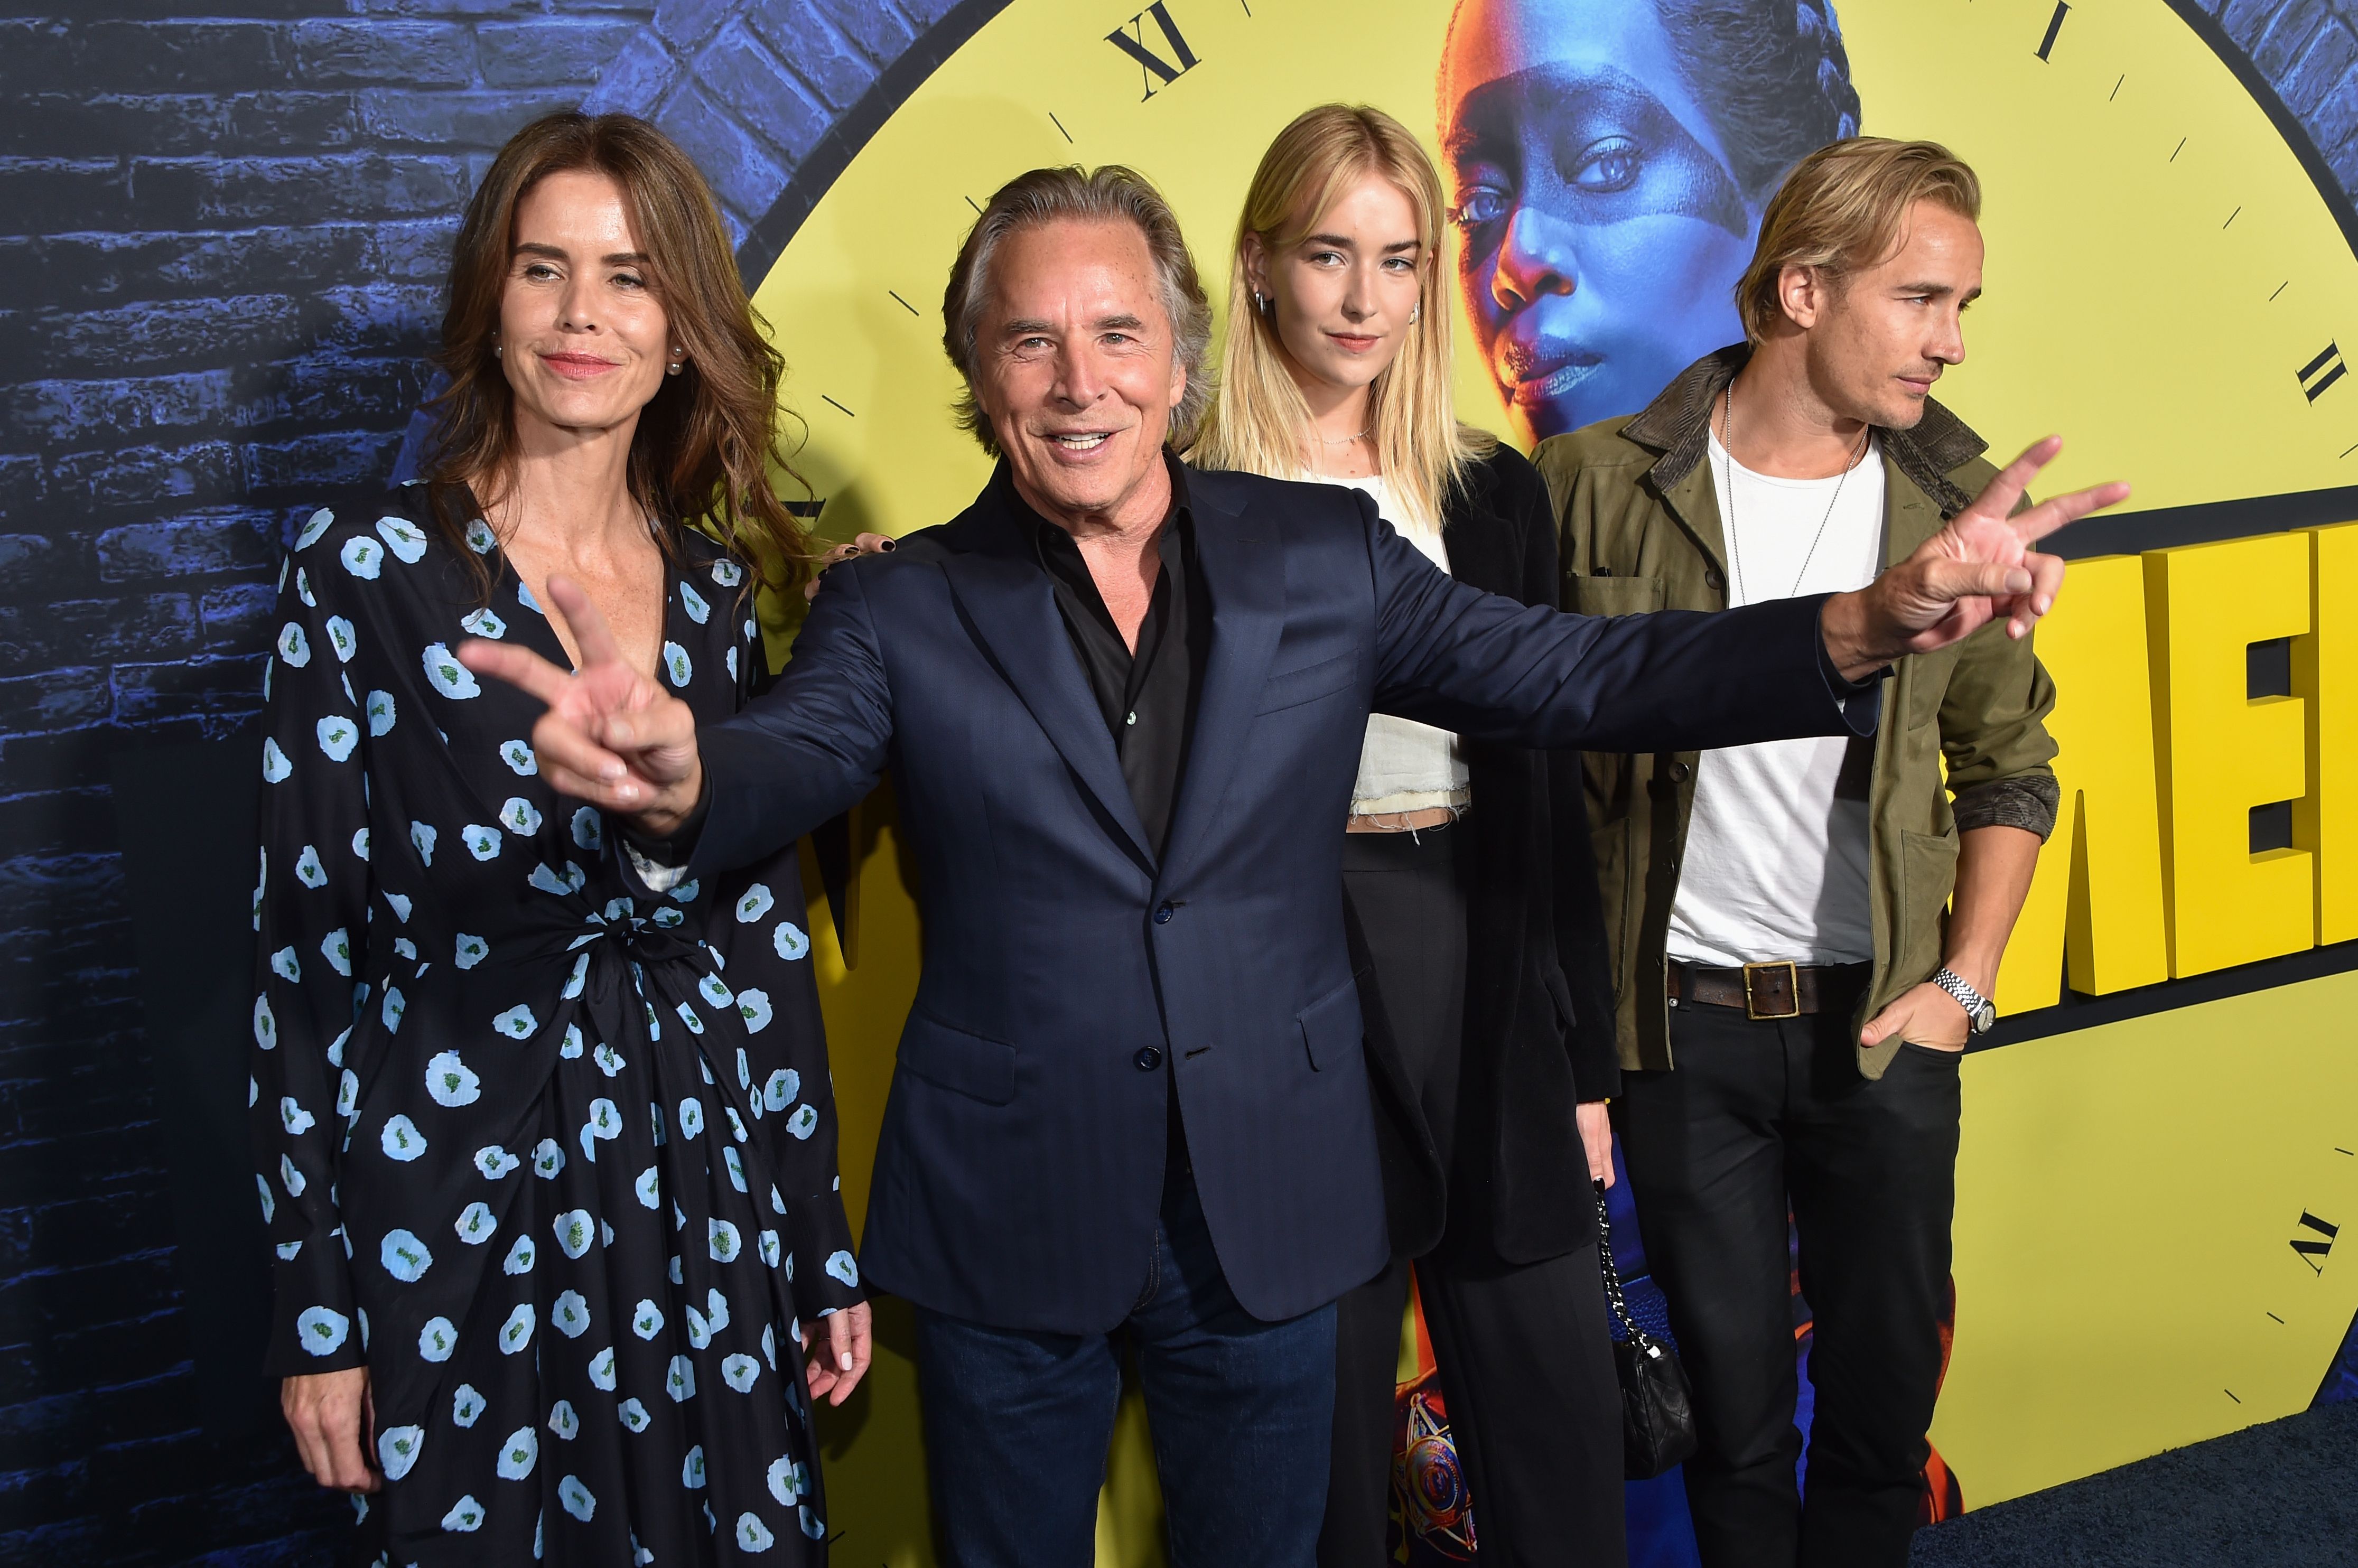 Kelley Phleger, Don Johnson, and his children Grace and Jesse at the Los Angeles premiere of "Watchmen" on October 14, 2019 | Source: Getty Images